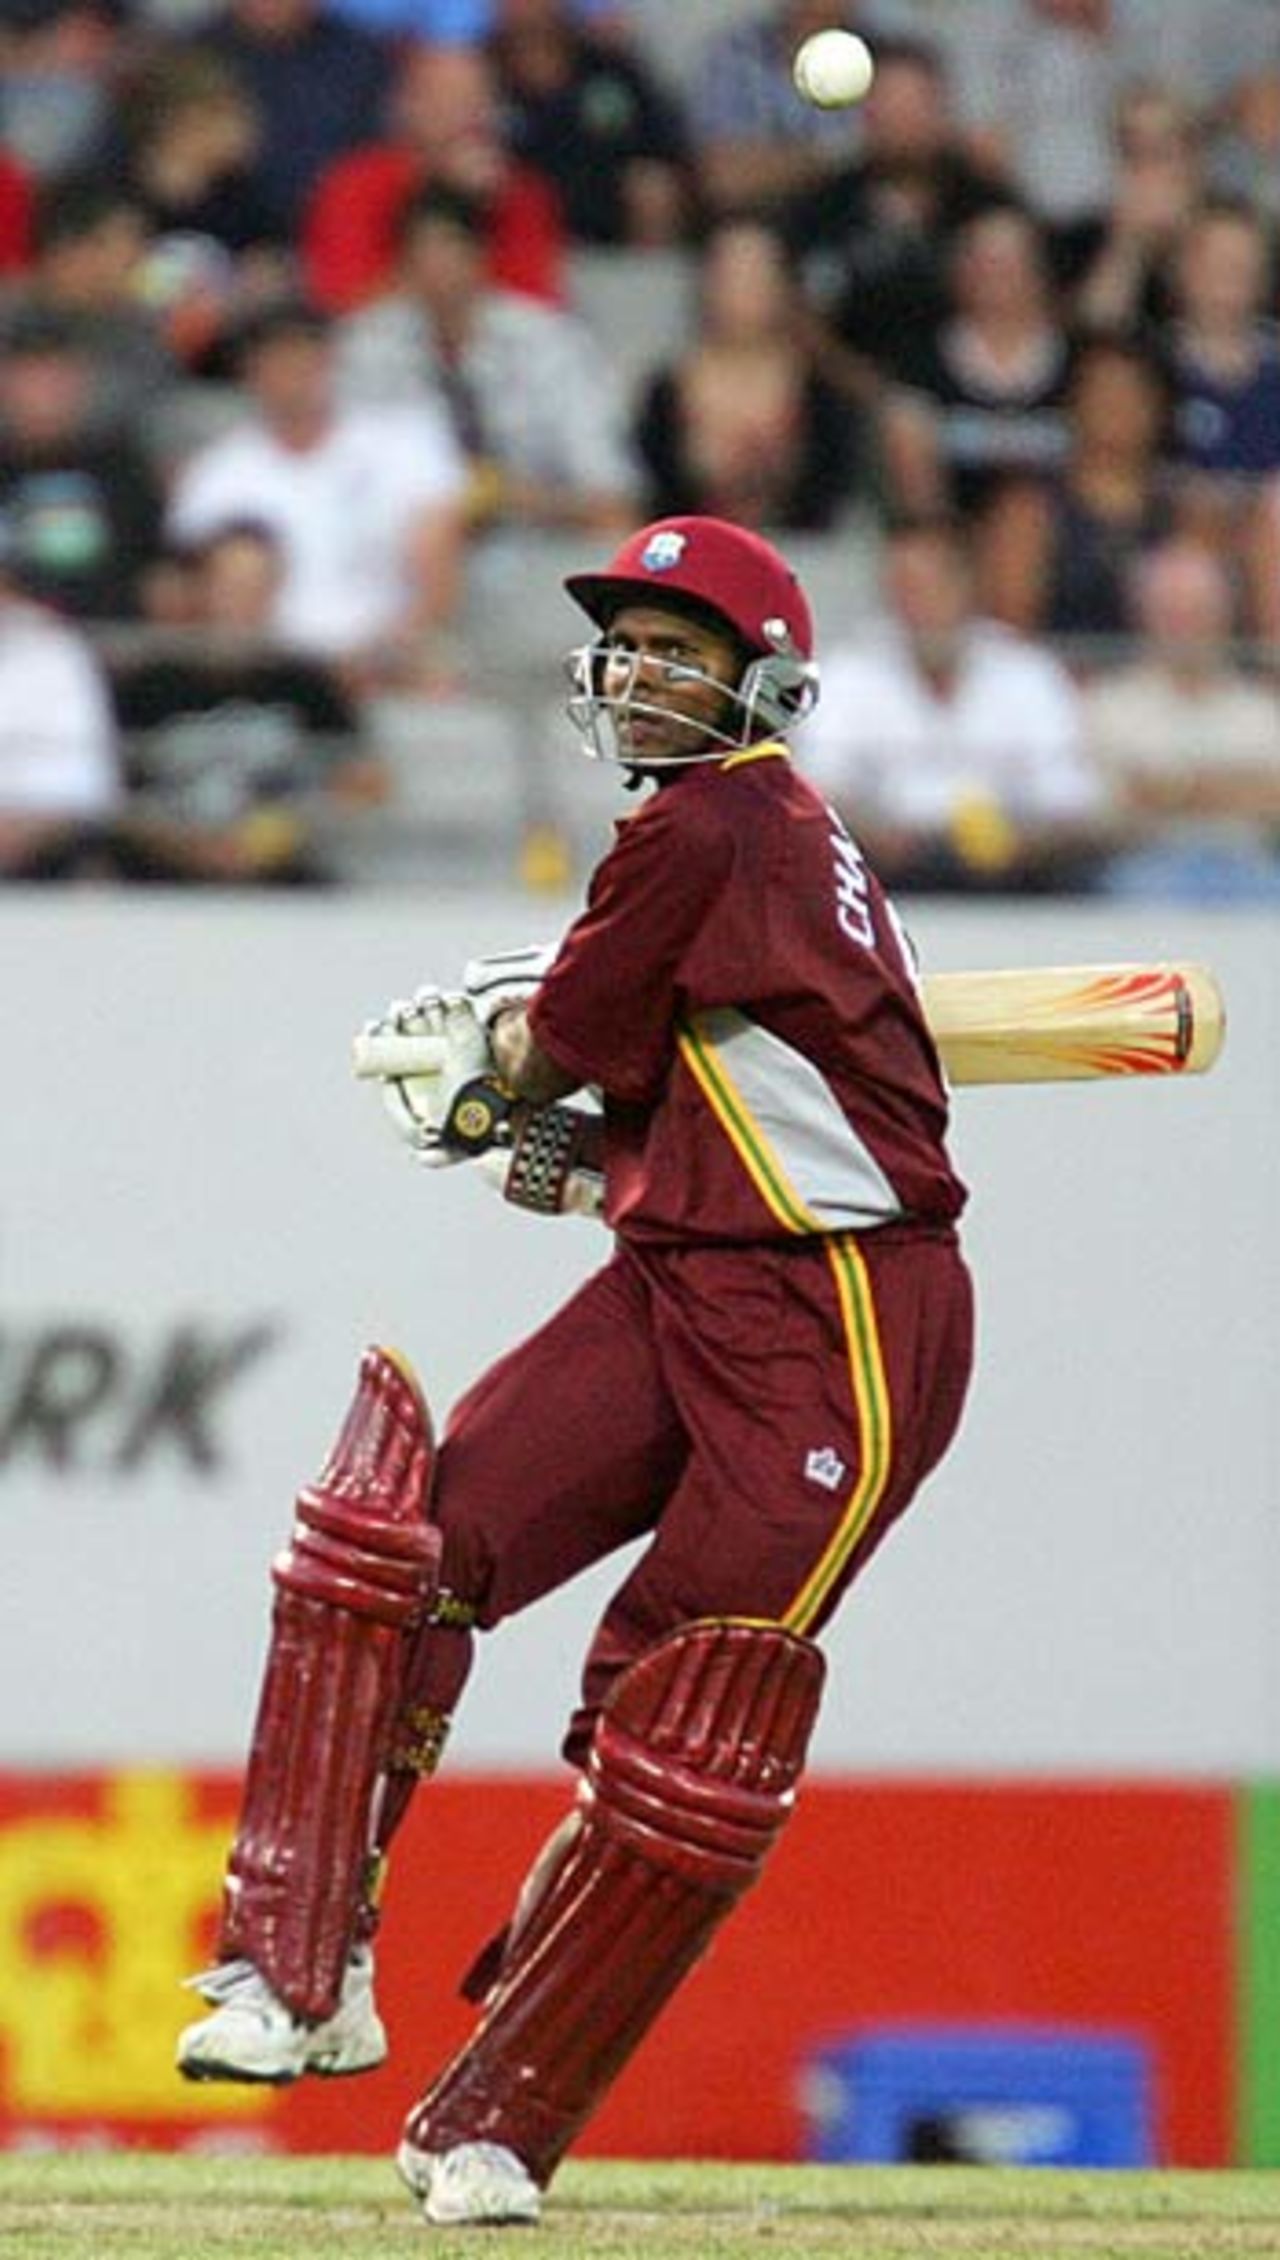 Shivnarine Chanderpaul fails to connect, New Zealand v West Indies, Twenty20, Auckland, February 16, 2006